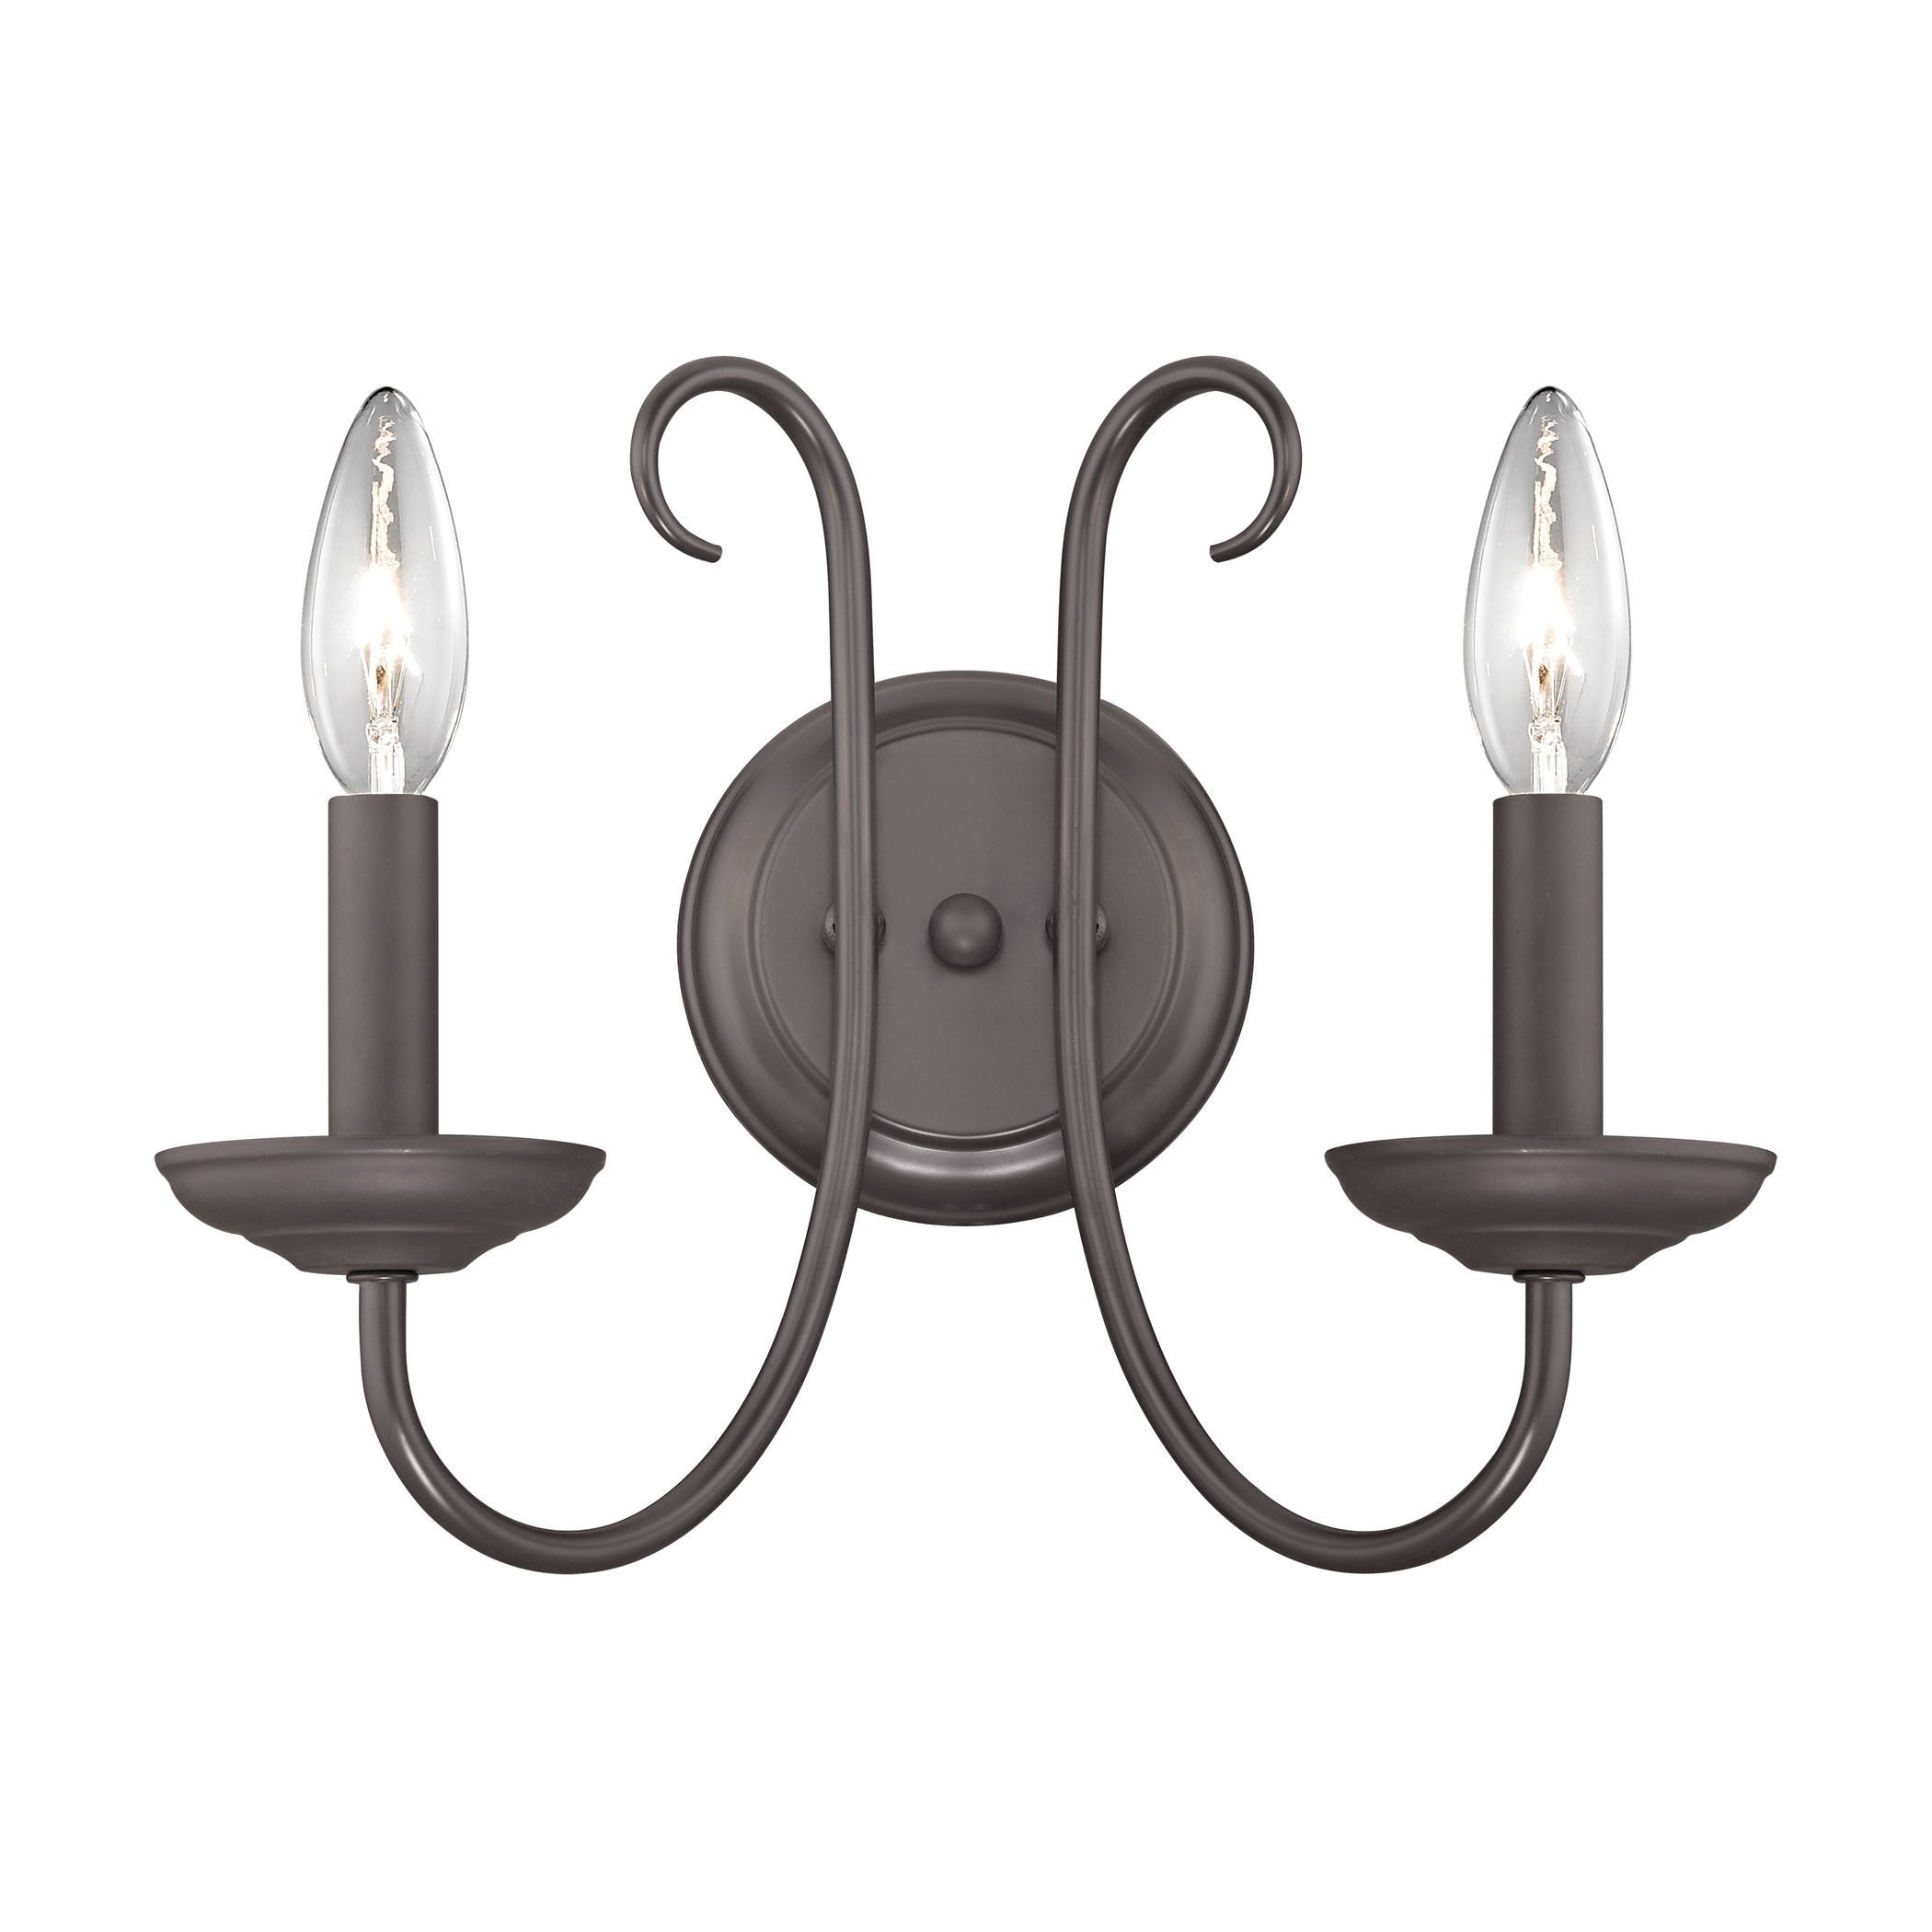 Williamsport 2-Light Wall Sconce in Oil Rubbed Bronze Wall Thomas Lighting 